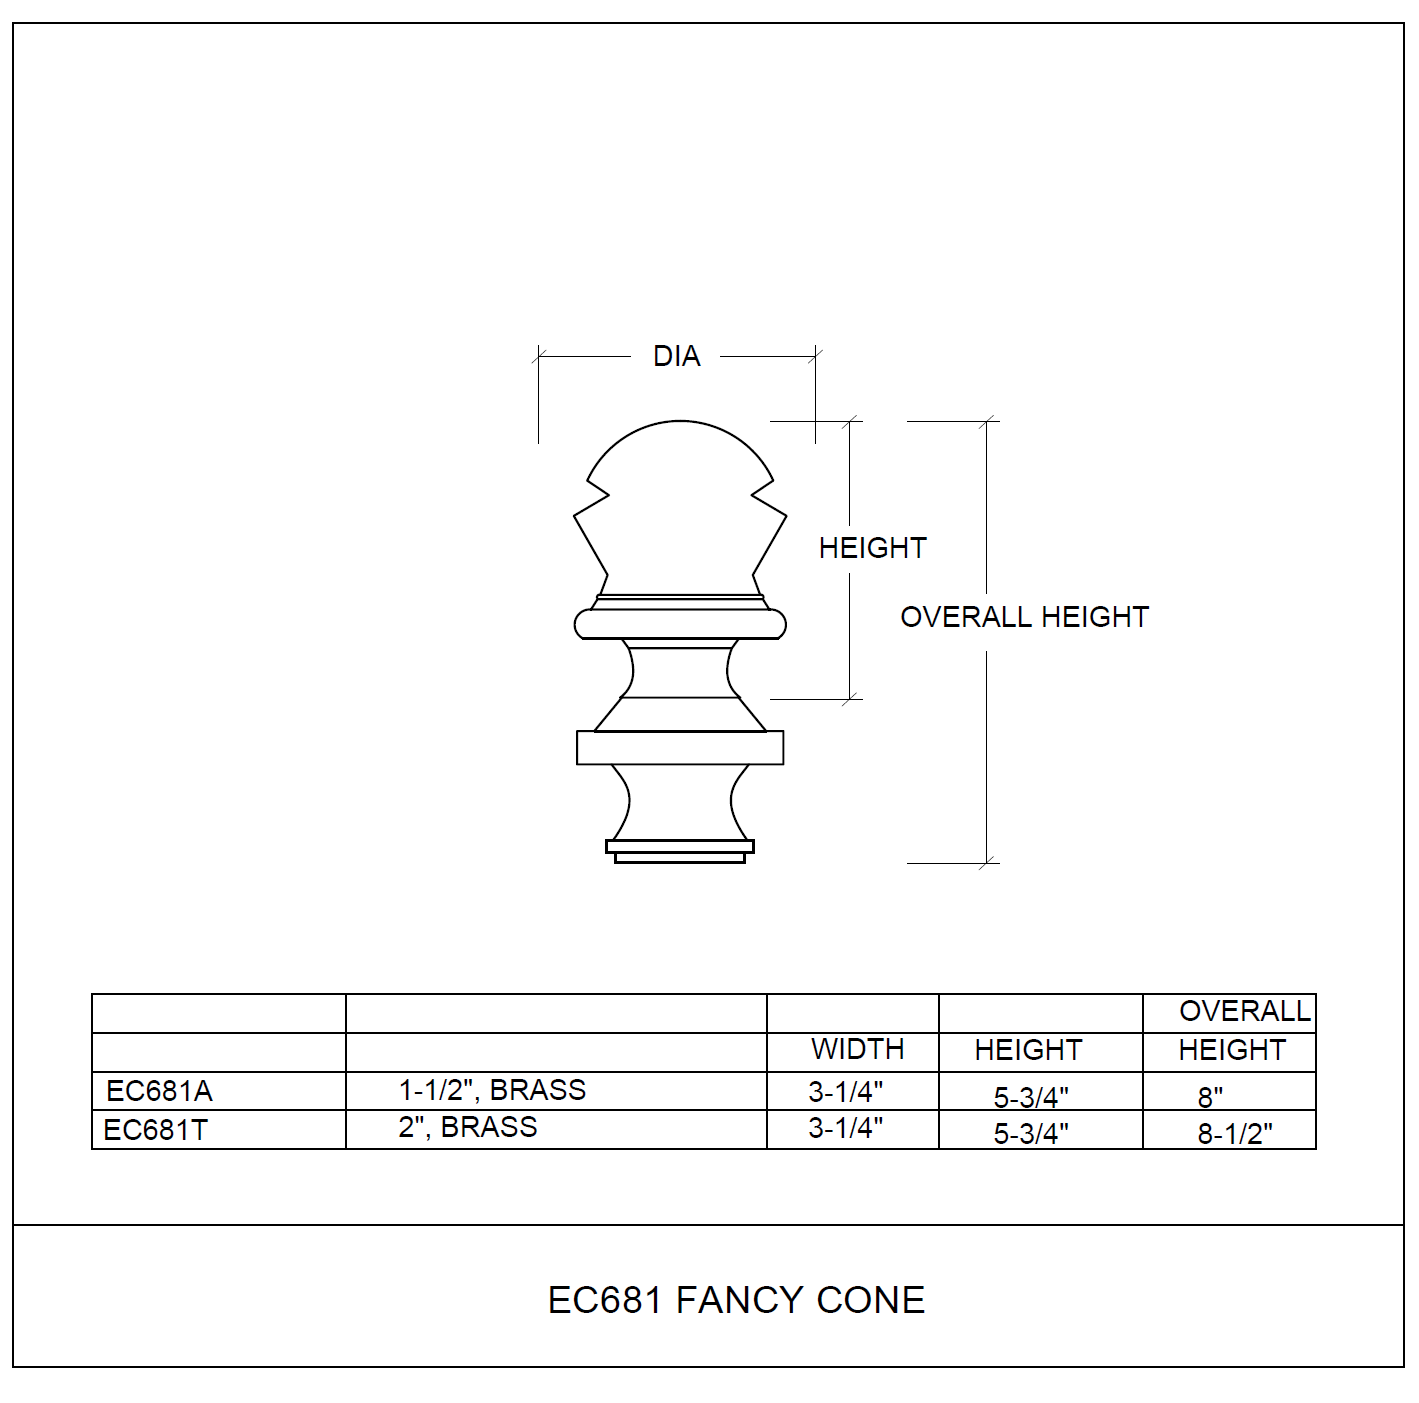 Fancy Cone 2" - All finishes